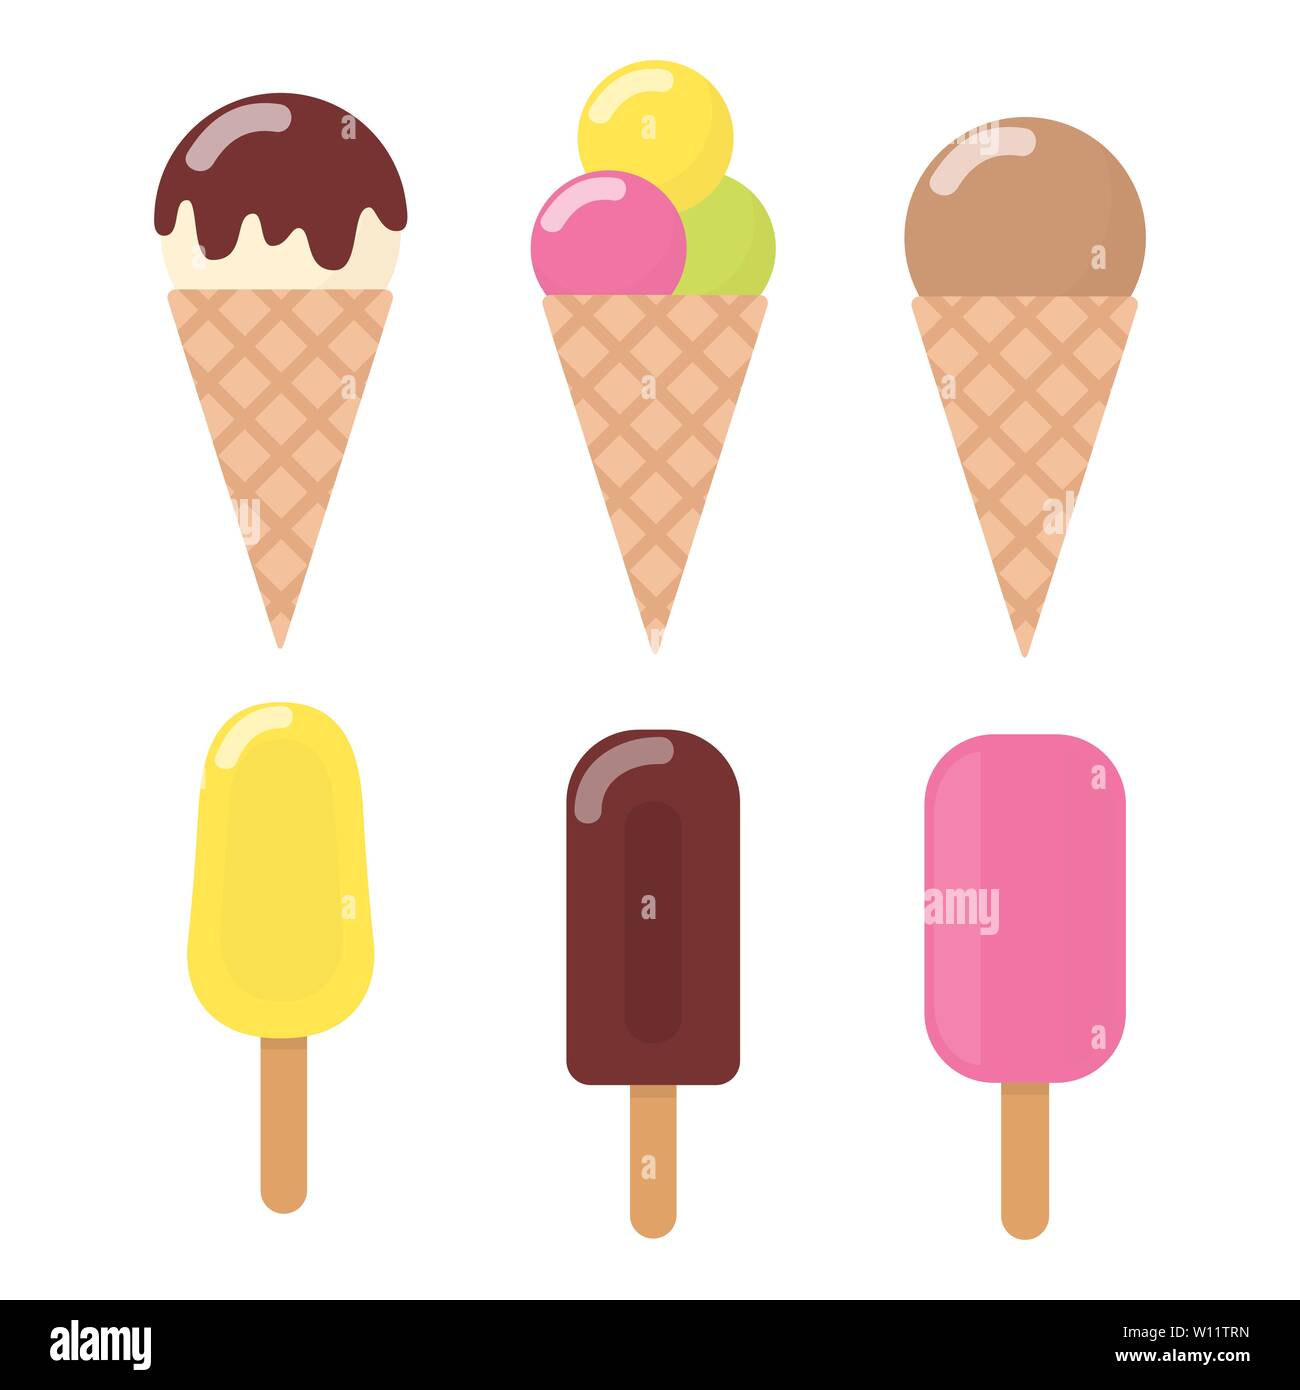 Collection ice cream cones and Popsicle with different topping. Chocolate, fruit, vanilla, ice cream. Stock Vector